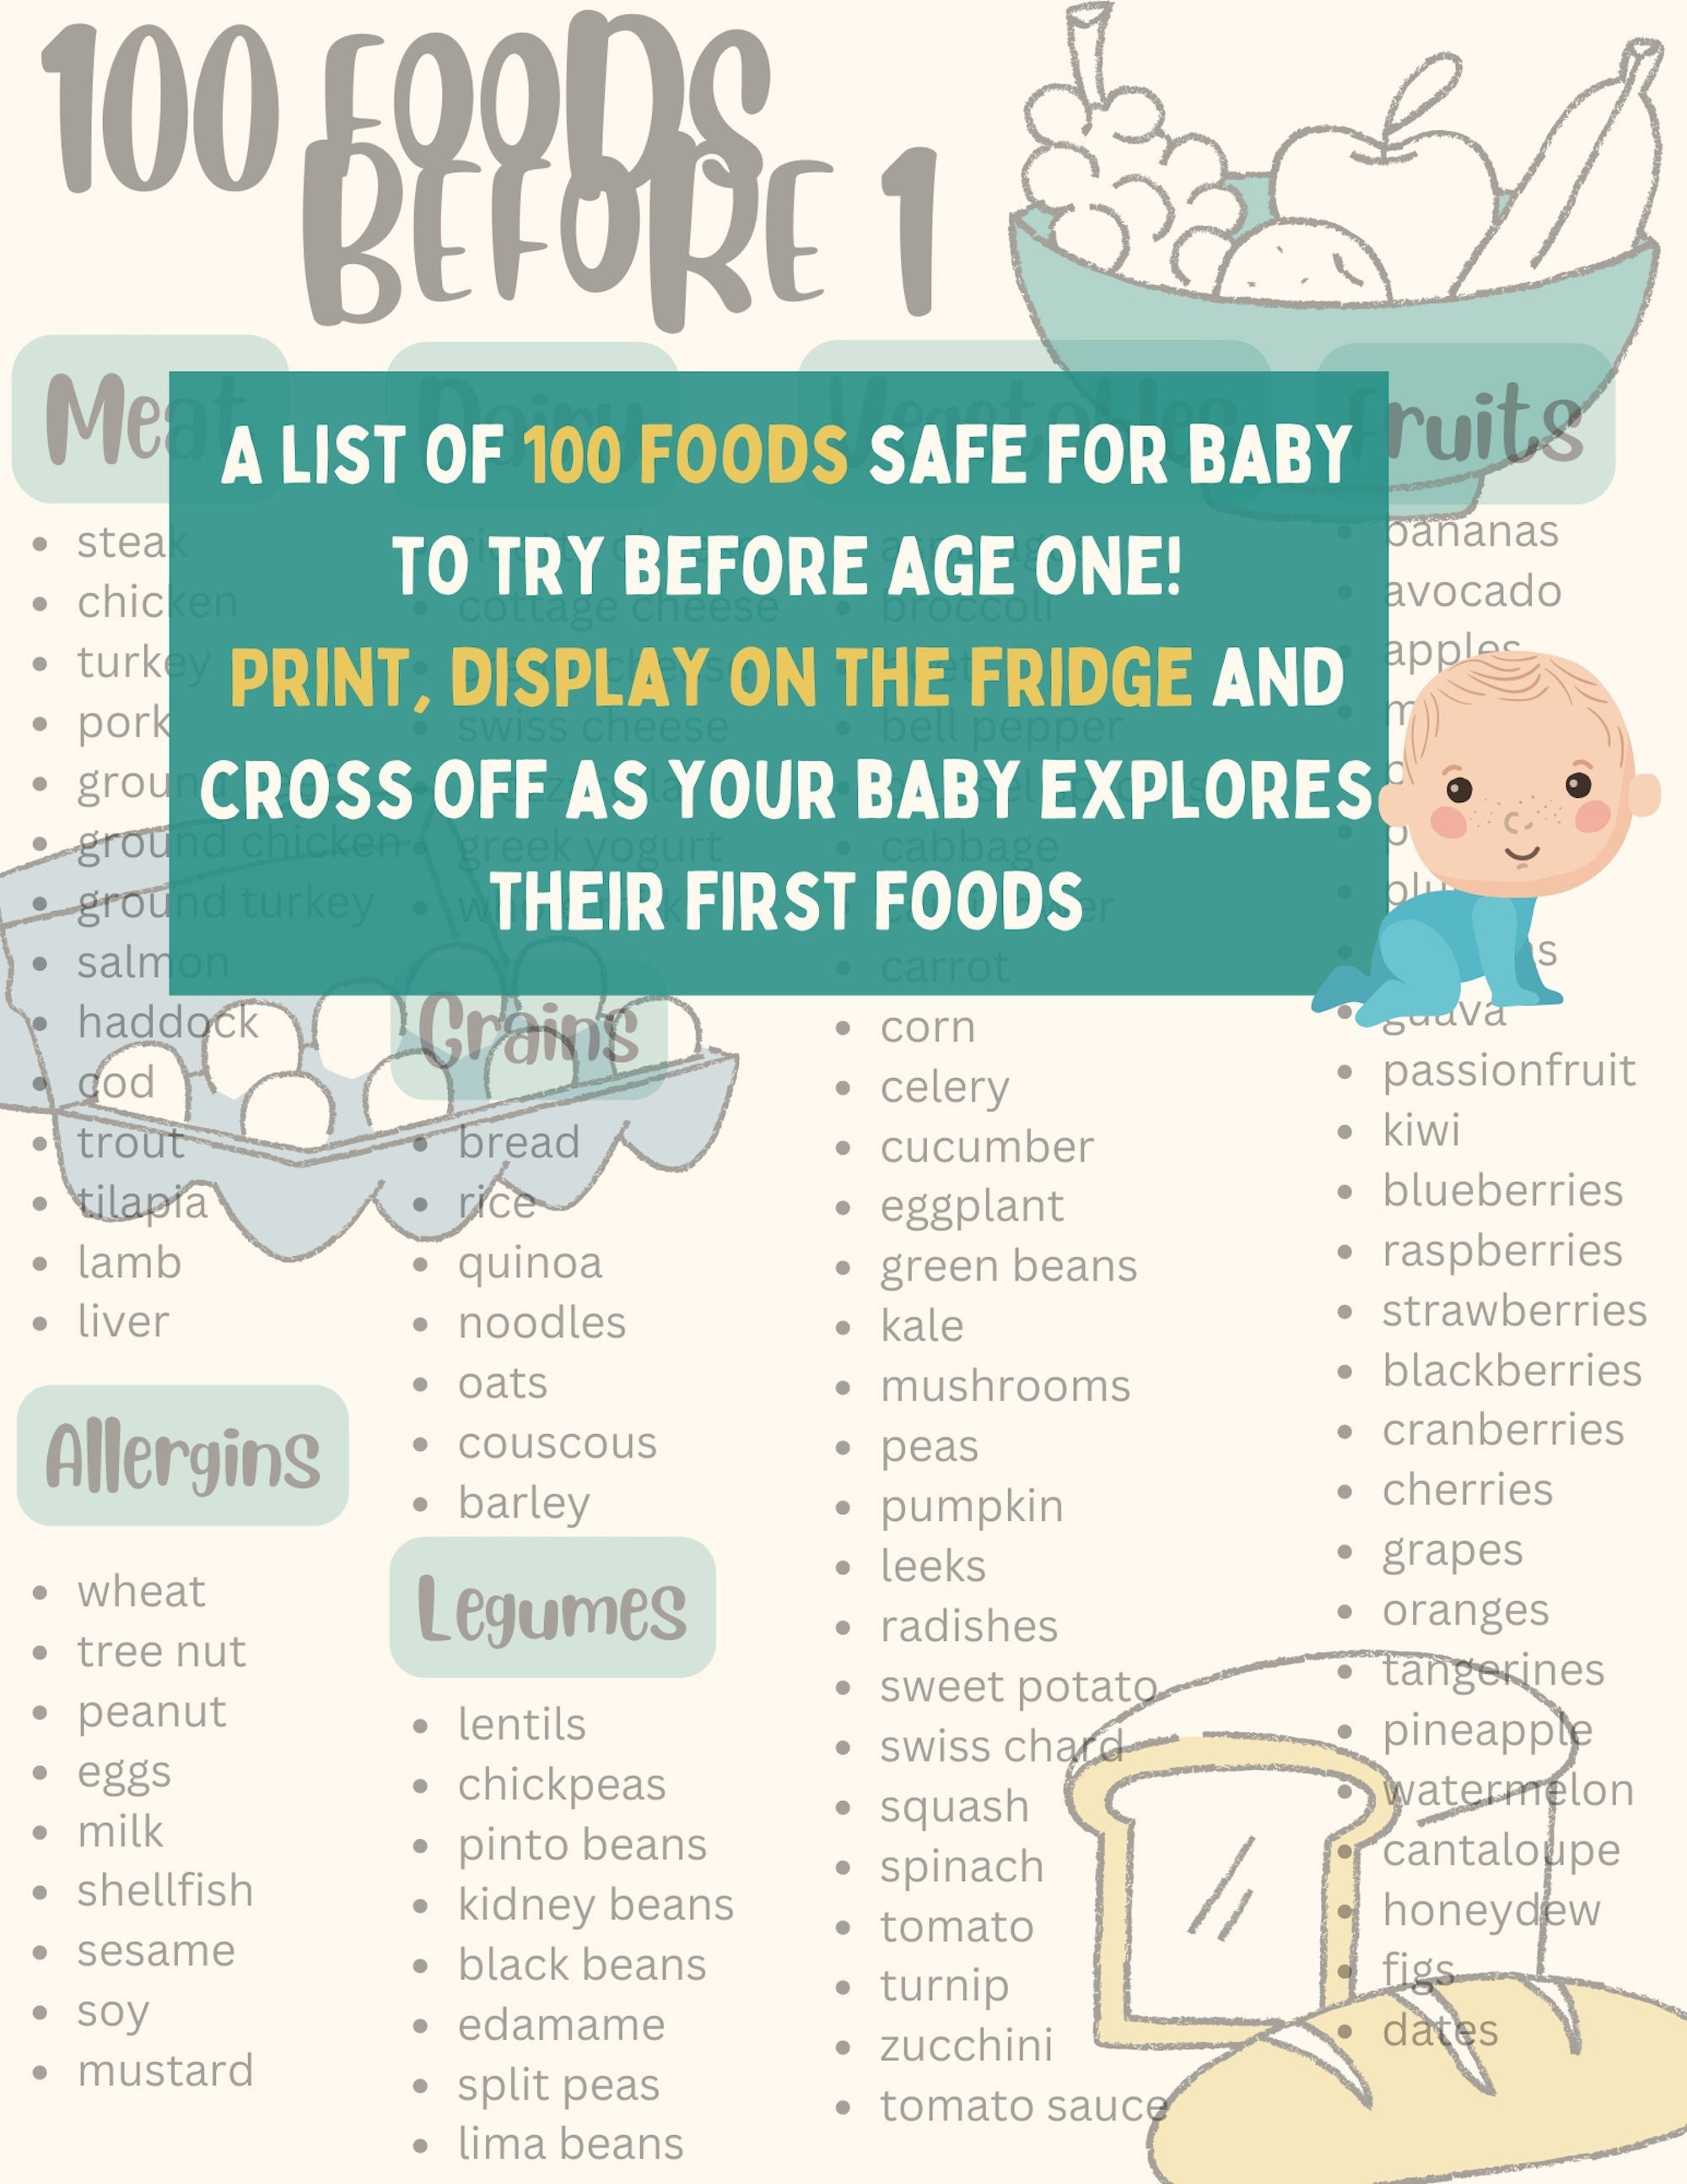 Printable Baby Food Chart: BLW, Purees, Finger Foods